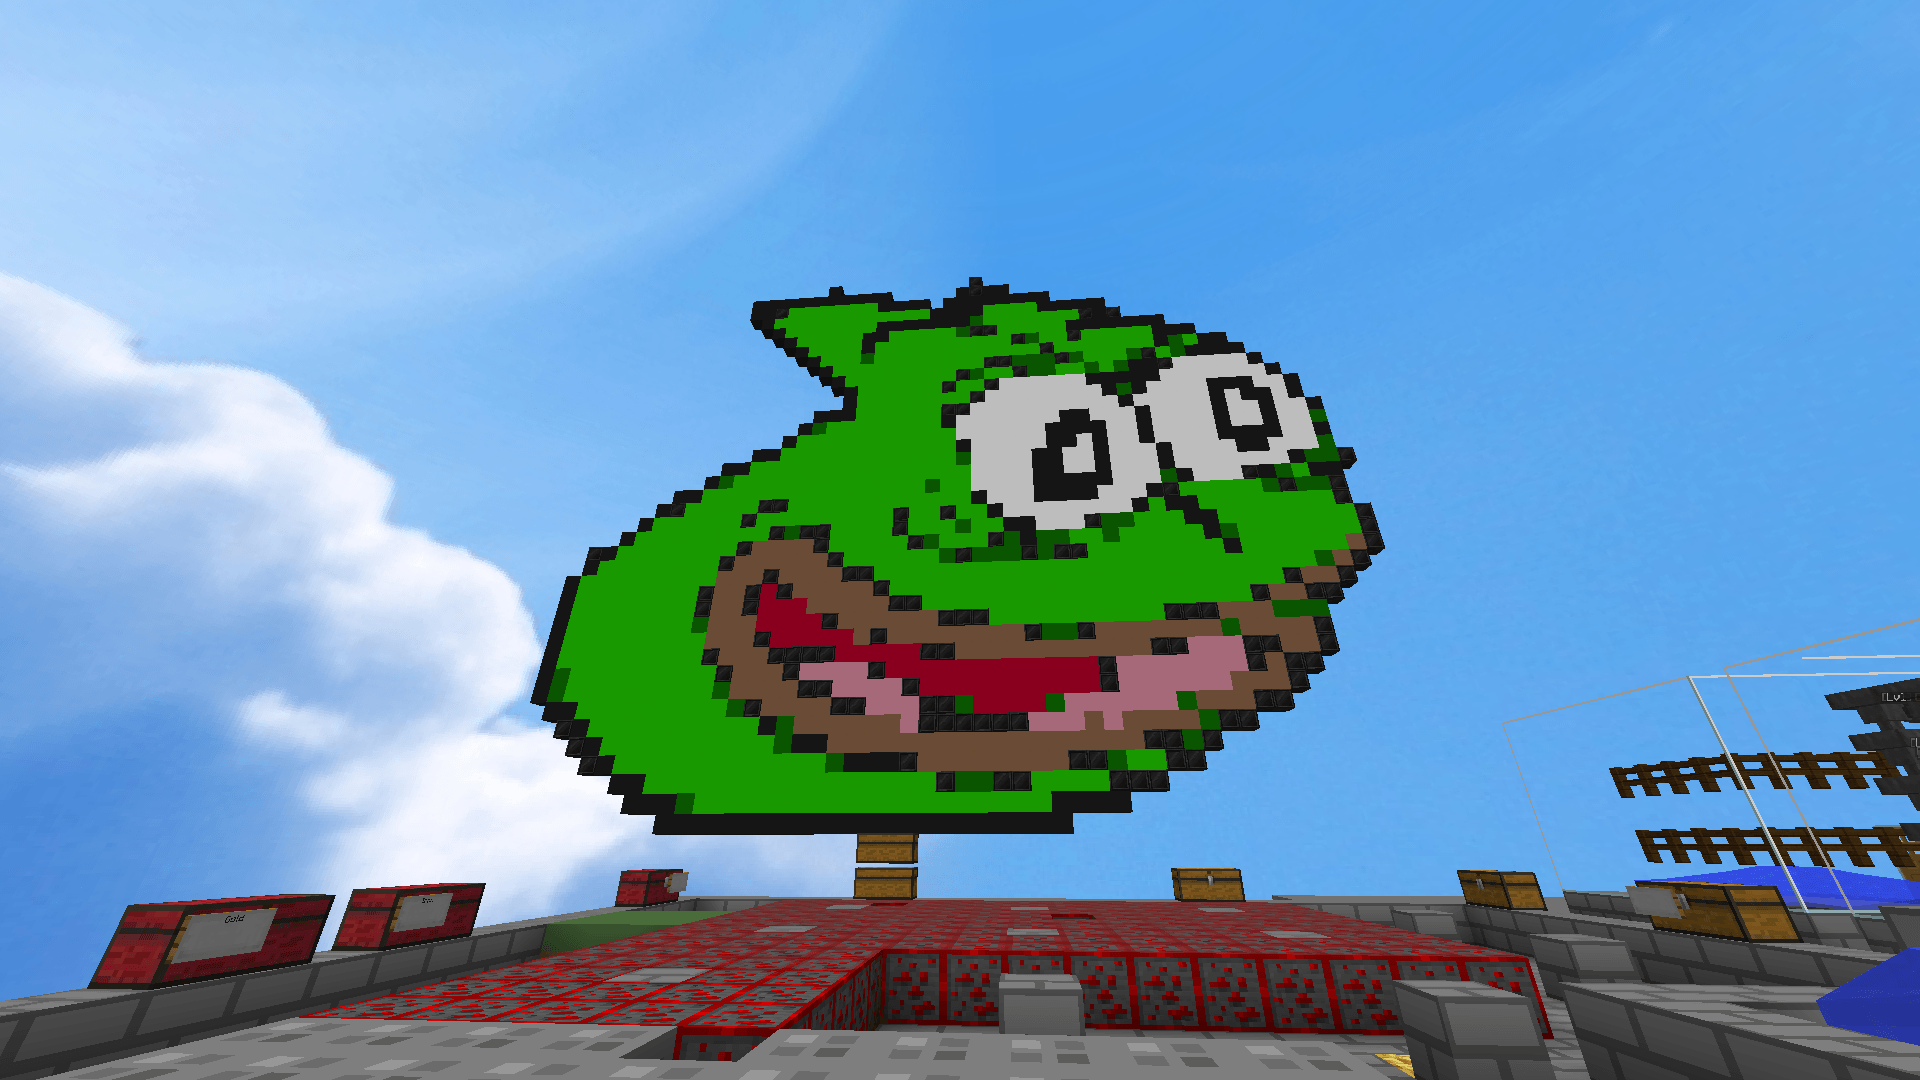 I made the pepega emote. Hypixel Server and Maps